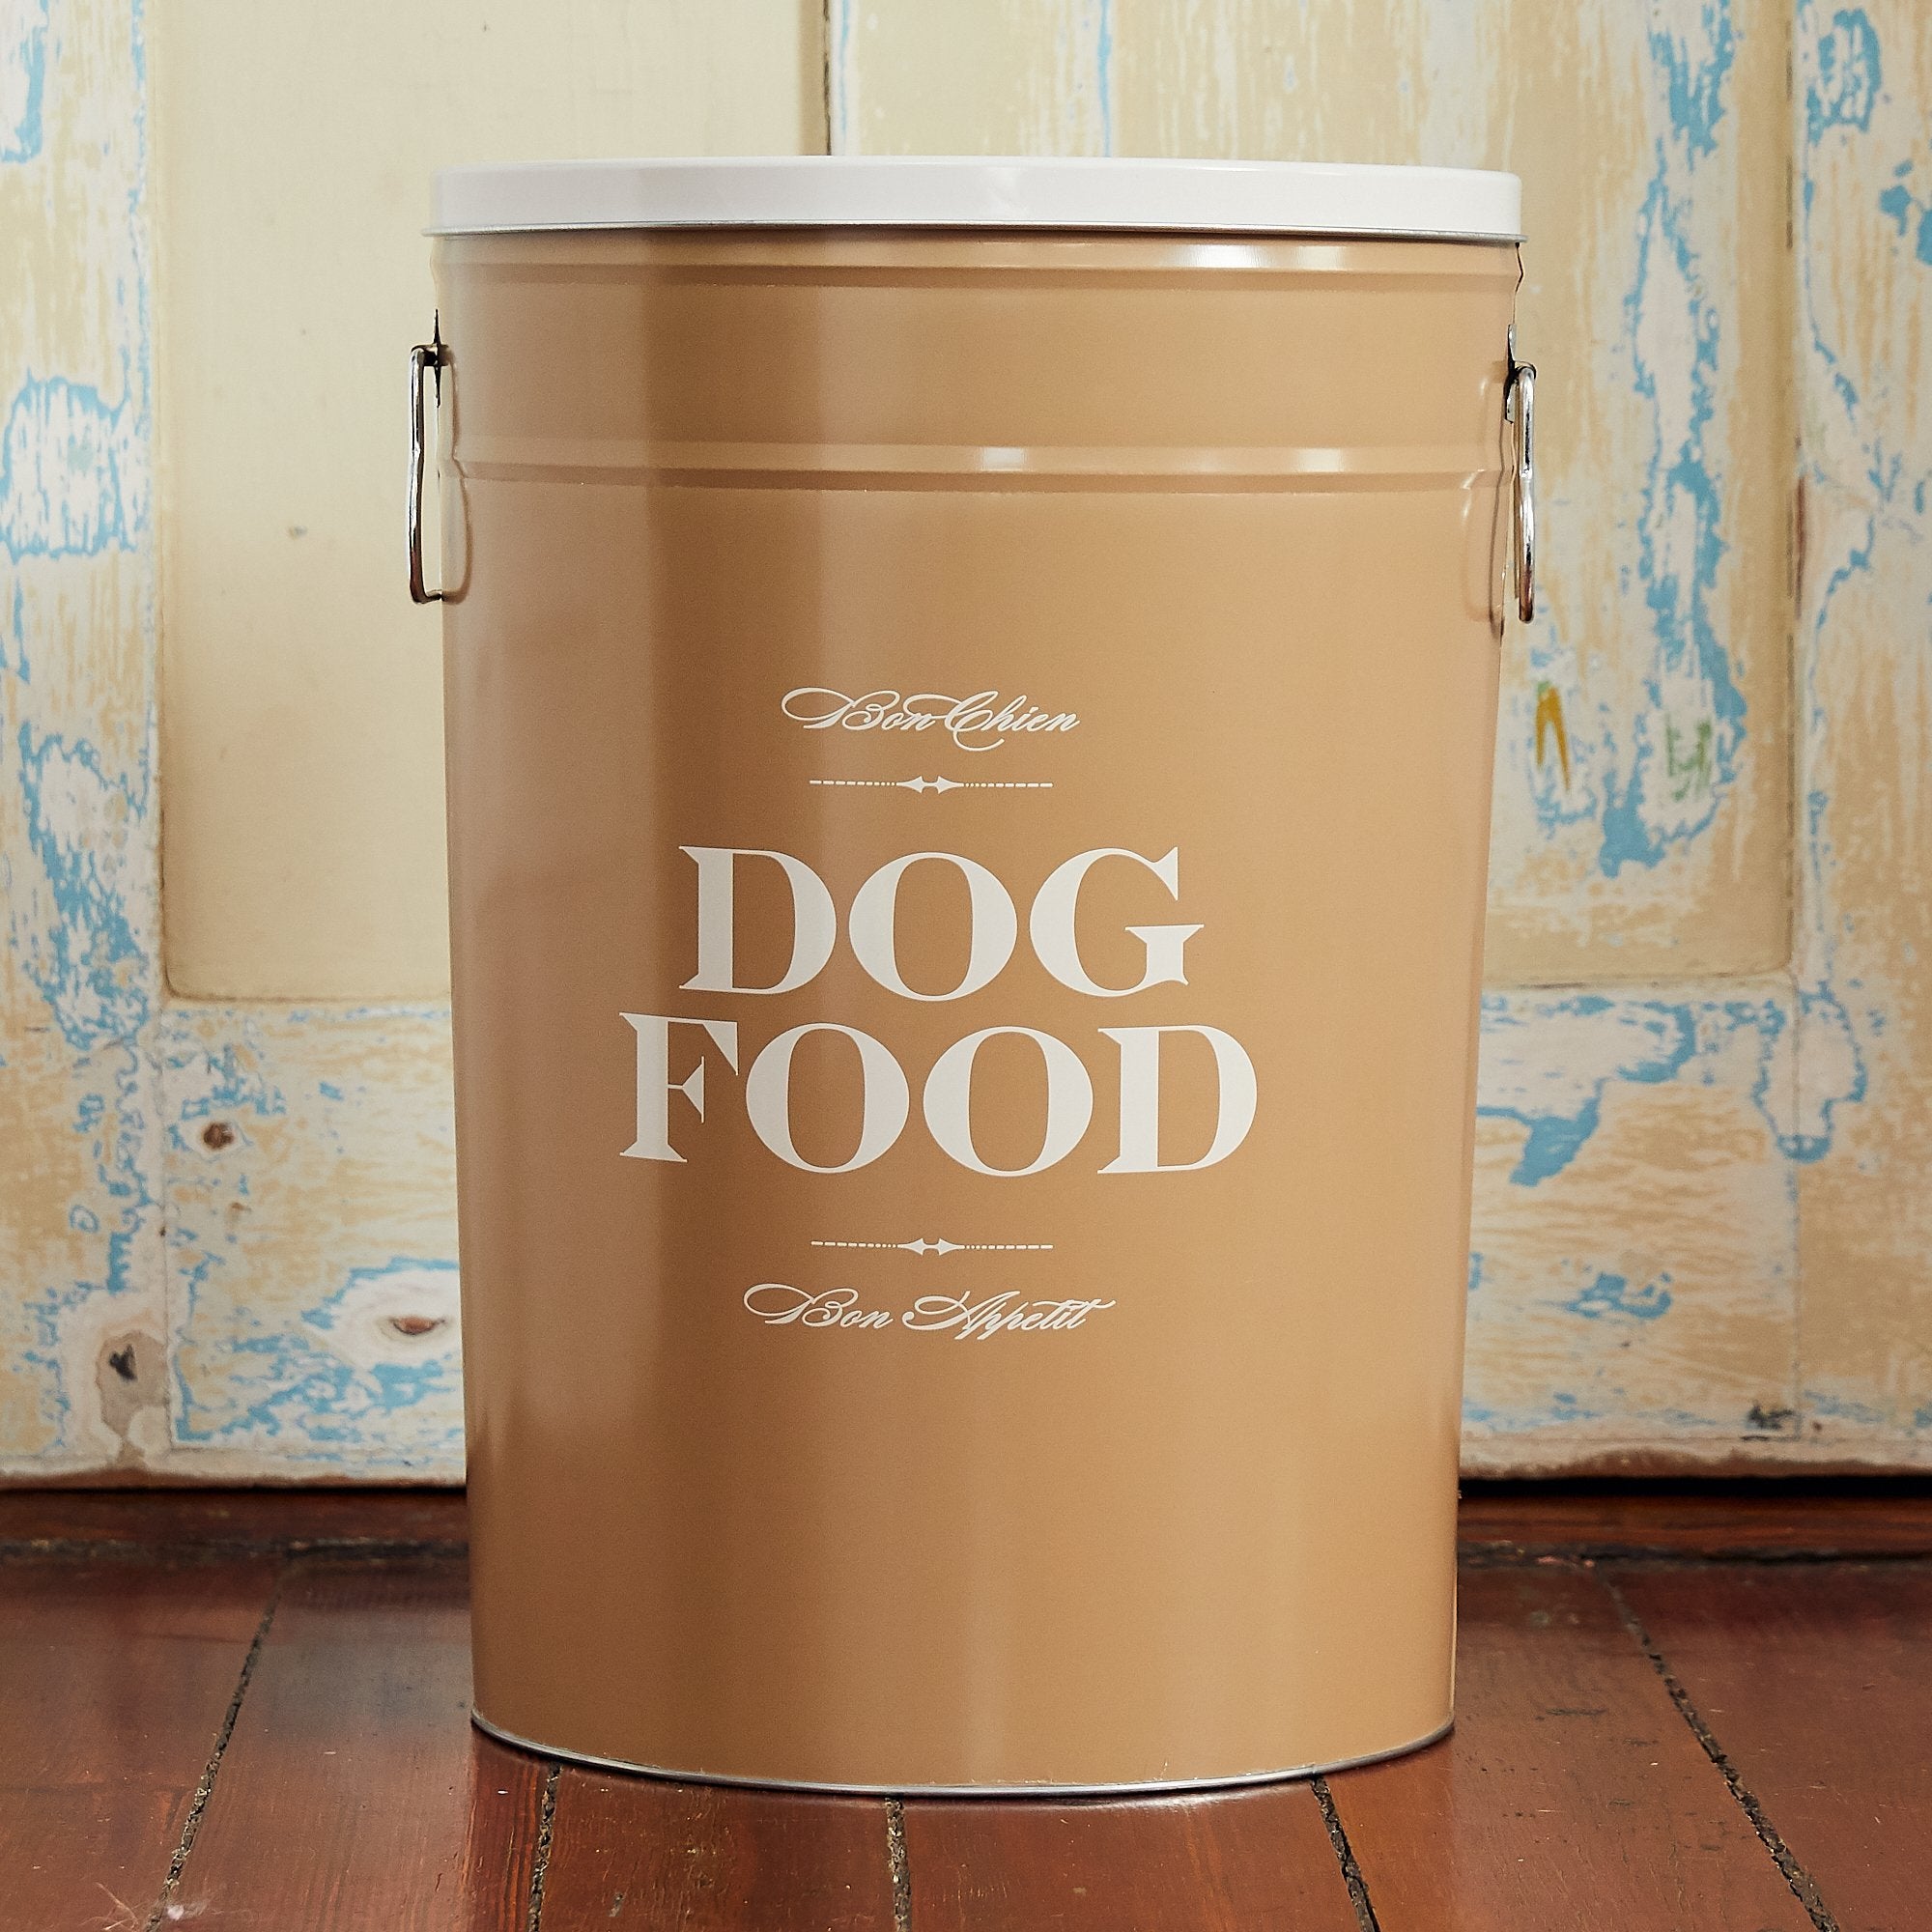 Large Food Storage Containers